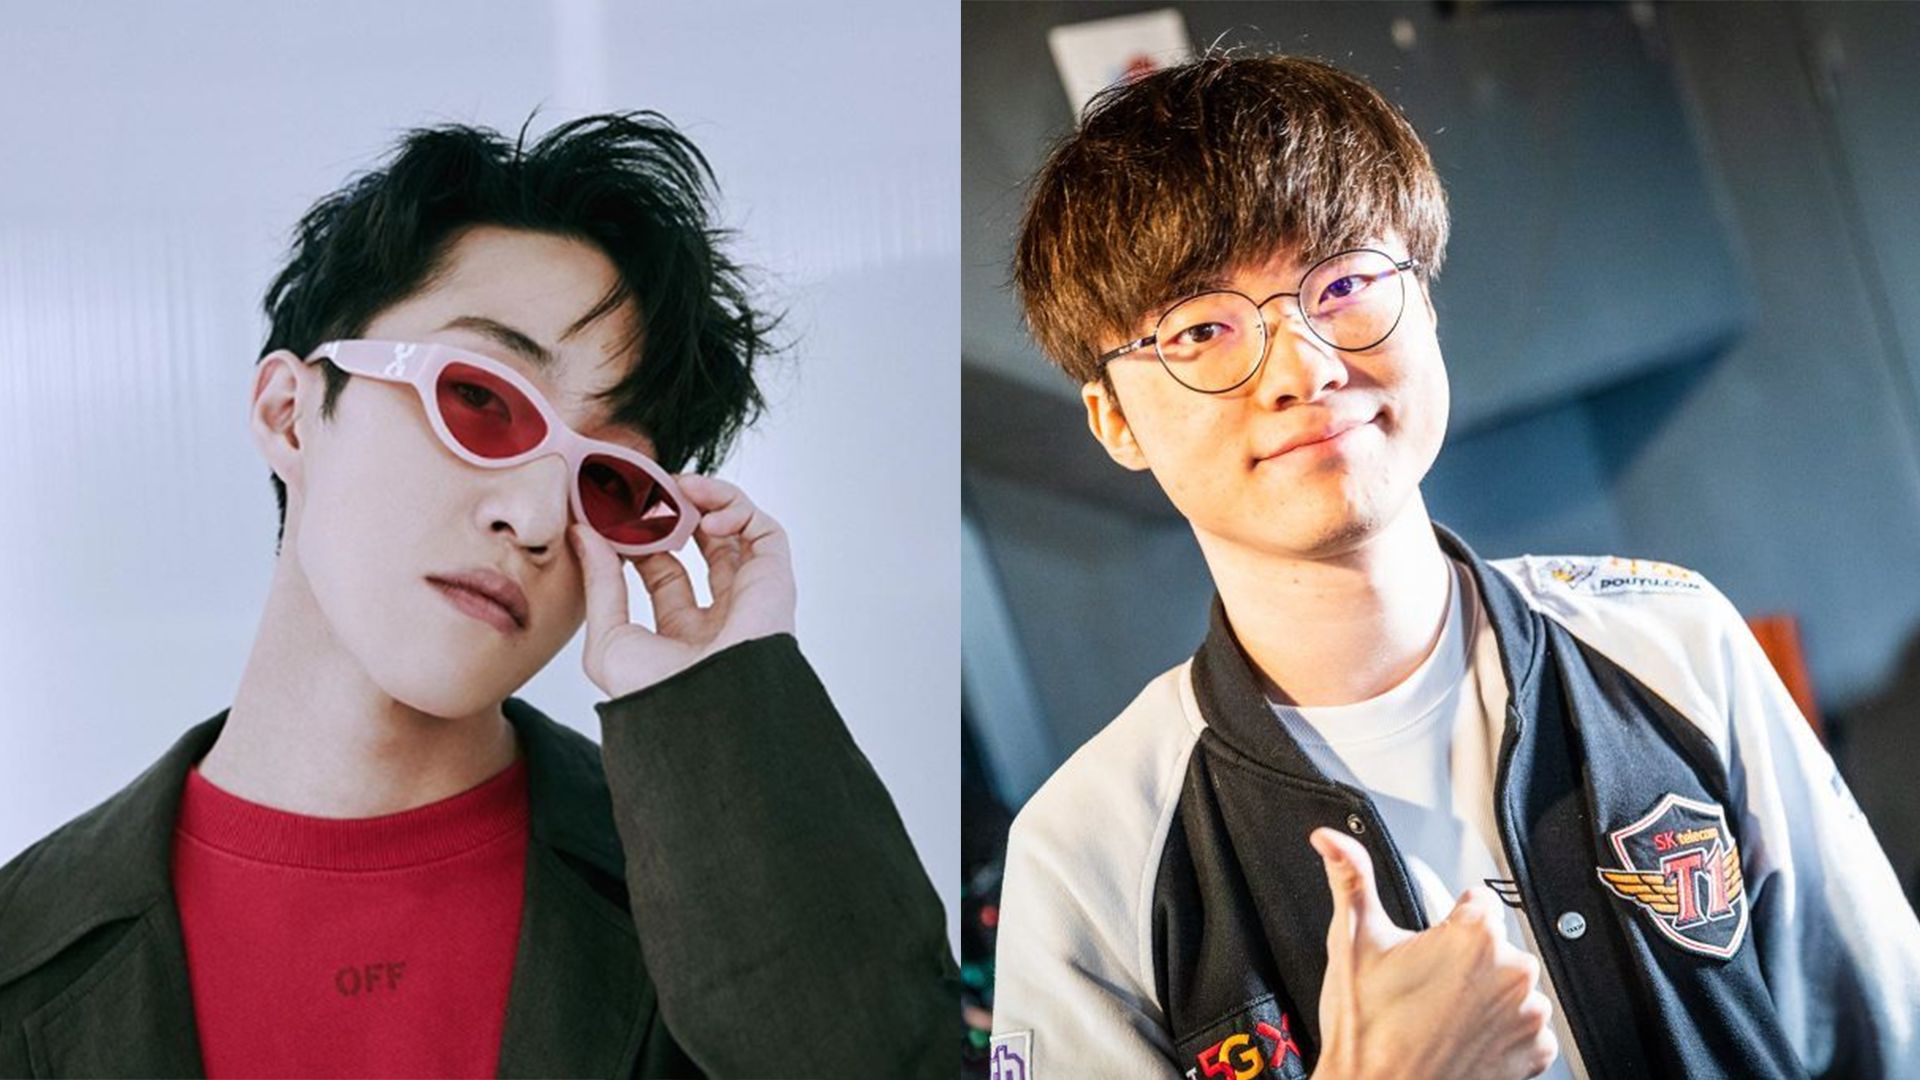 K-pop star Zion. T says he looks up to Faker